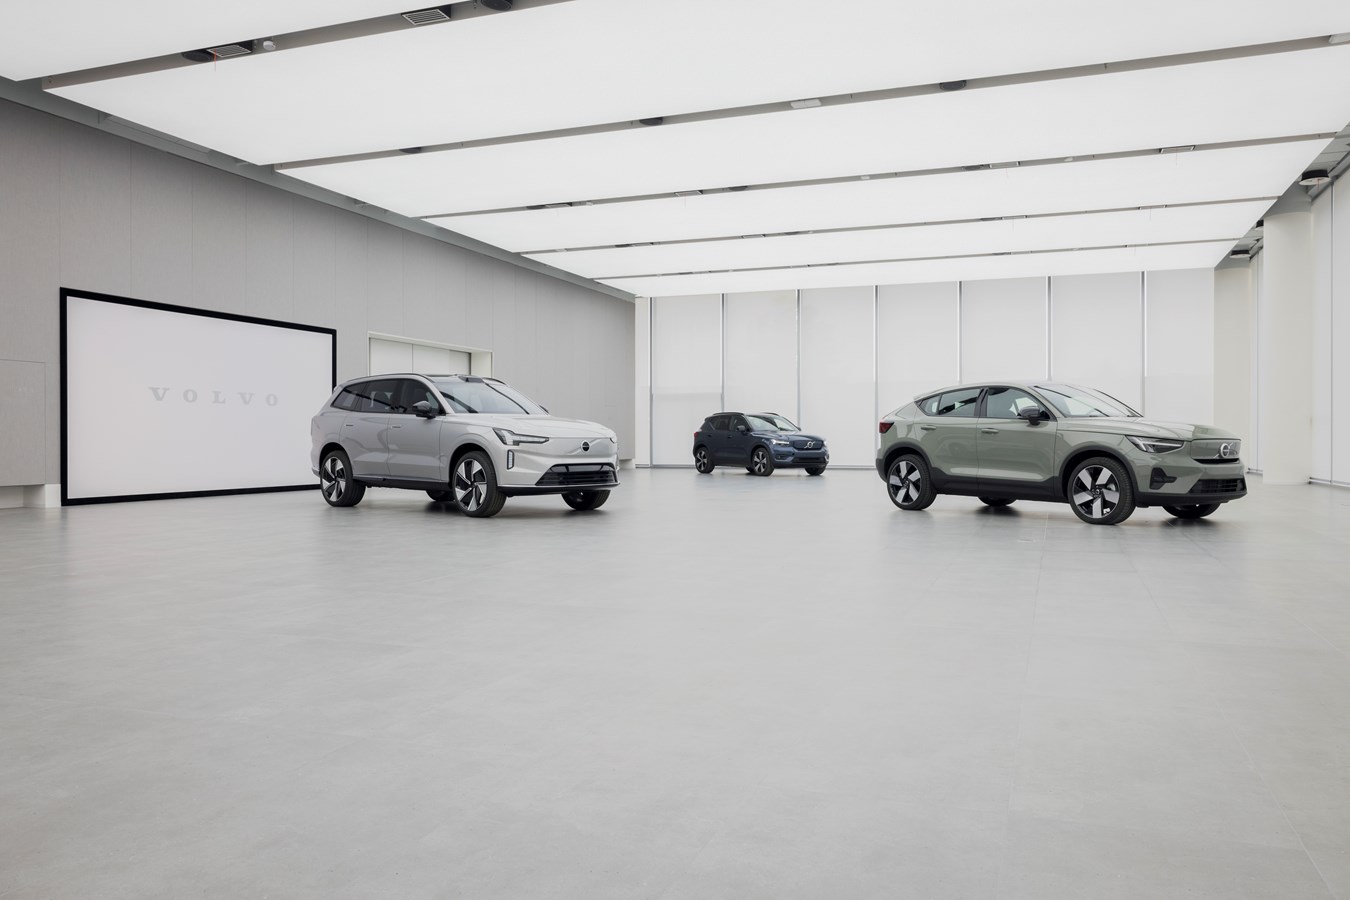 Three fully-electric models on display in the showroom